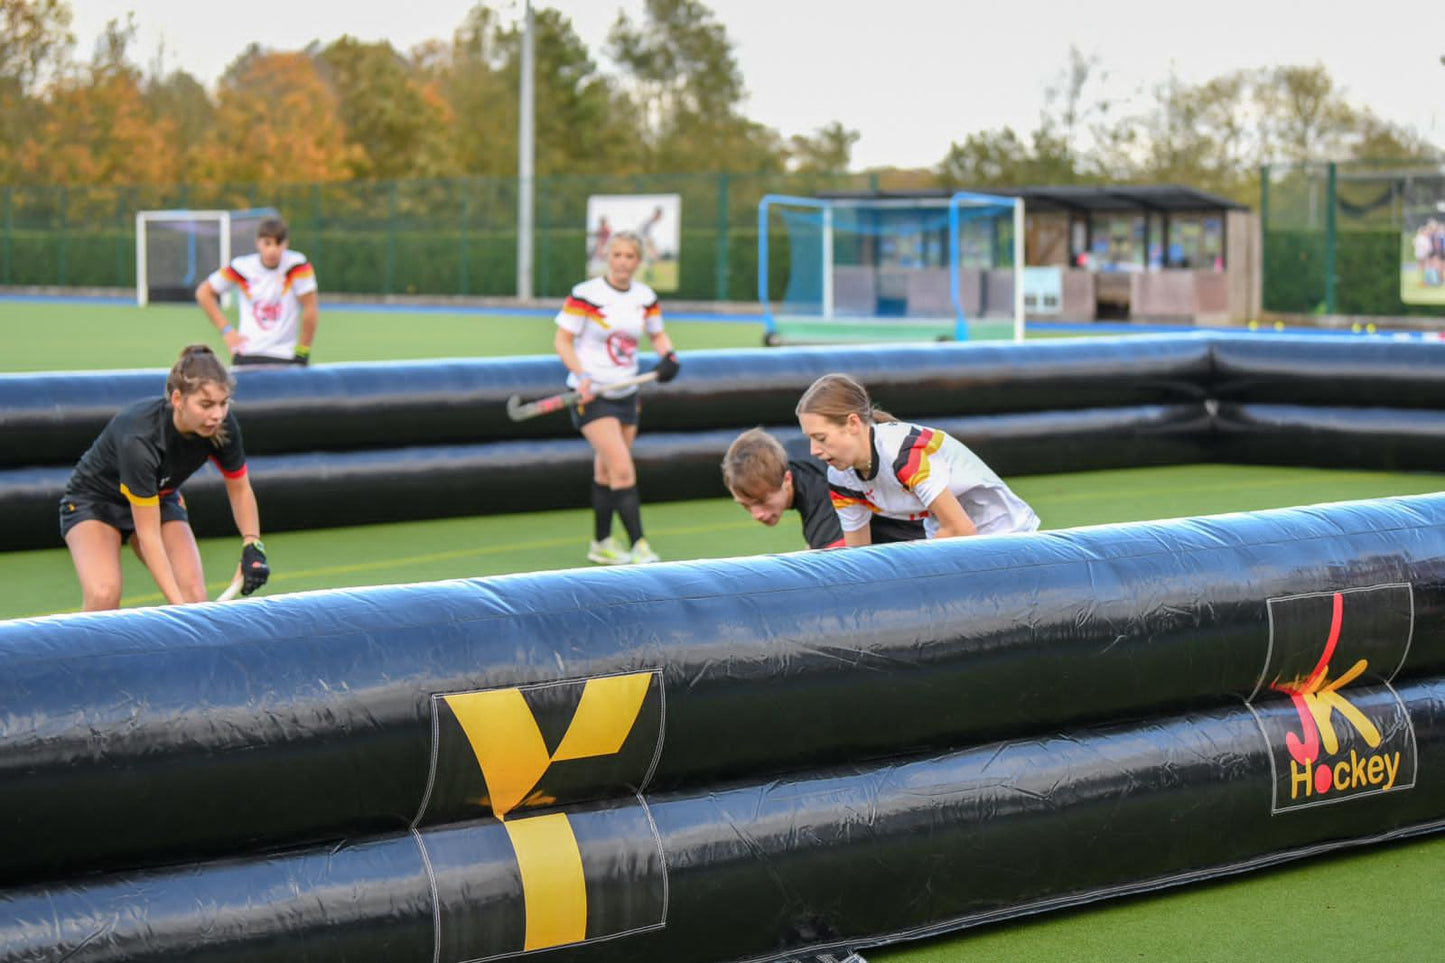 Inflatable Hockey Pitch